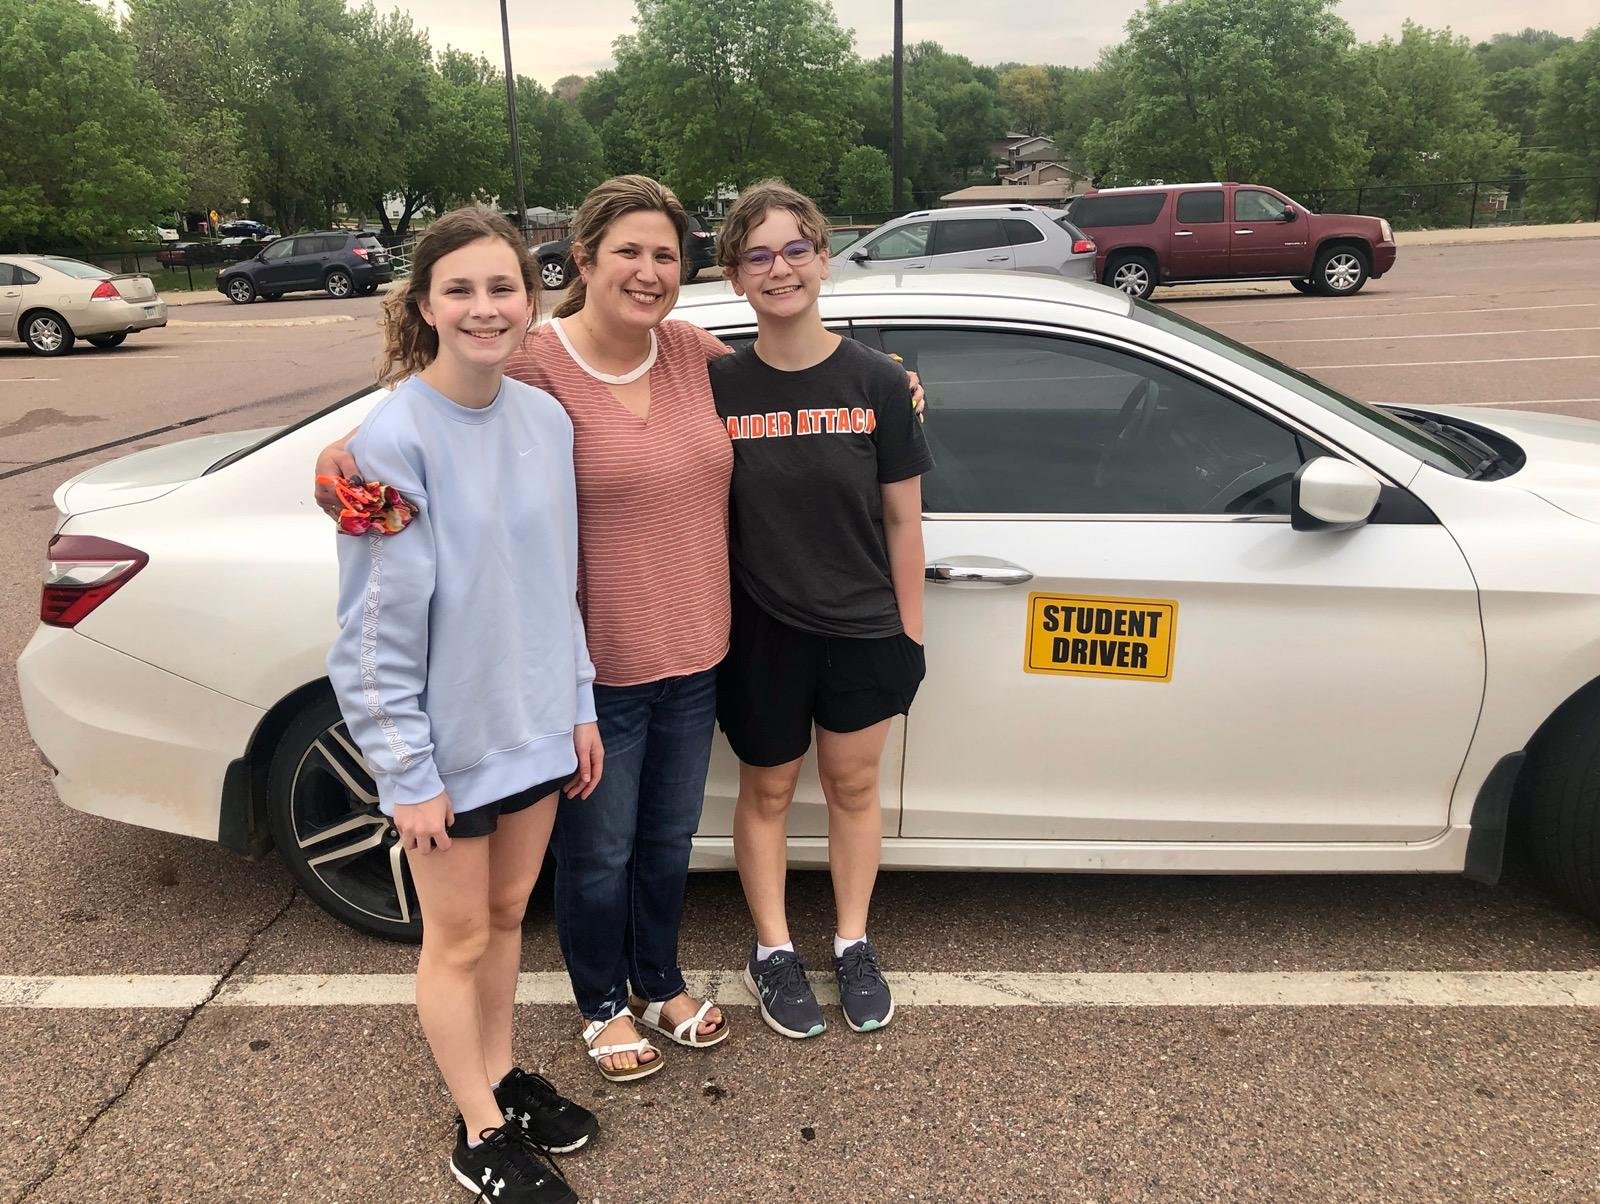 Kari standing by car with two students.